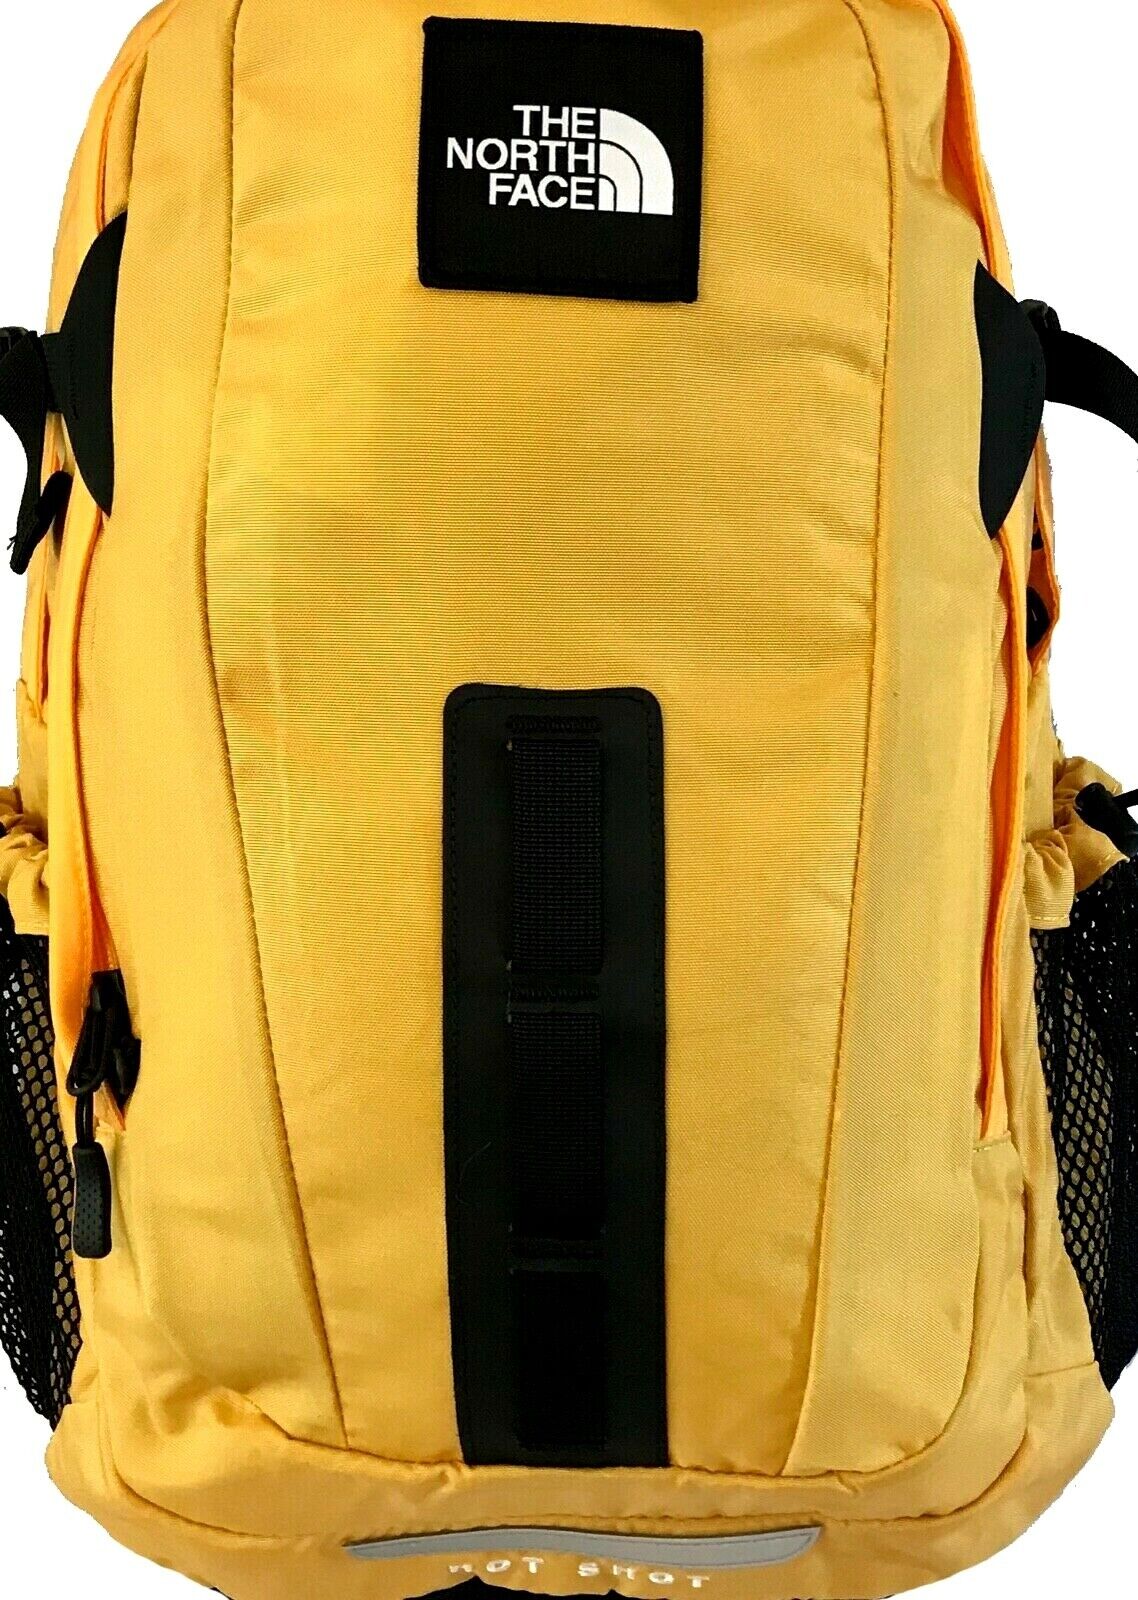 The North Face Hot Shot SE Special Edition 30l Backpack Yellow 